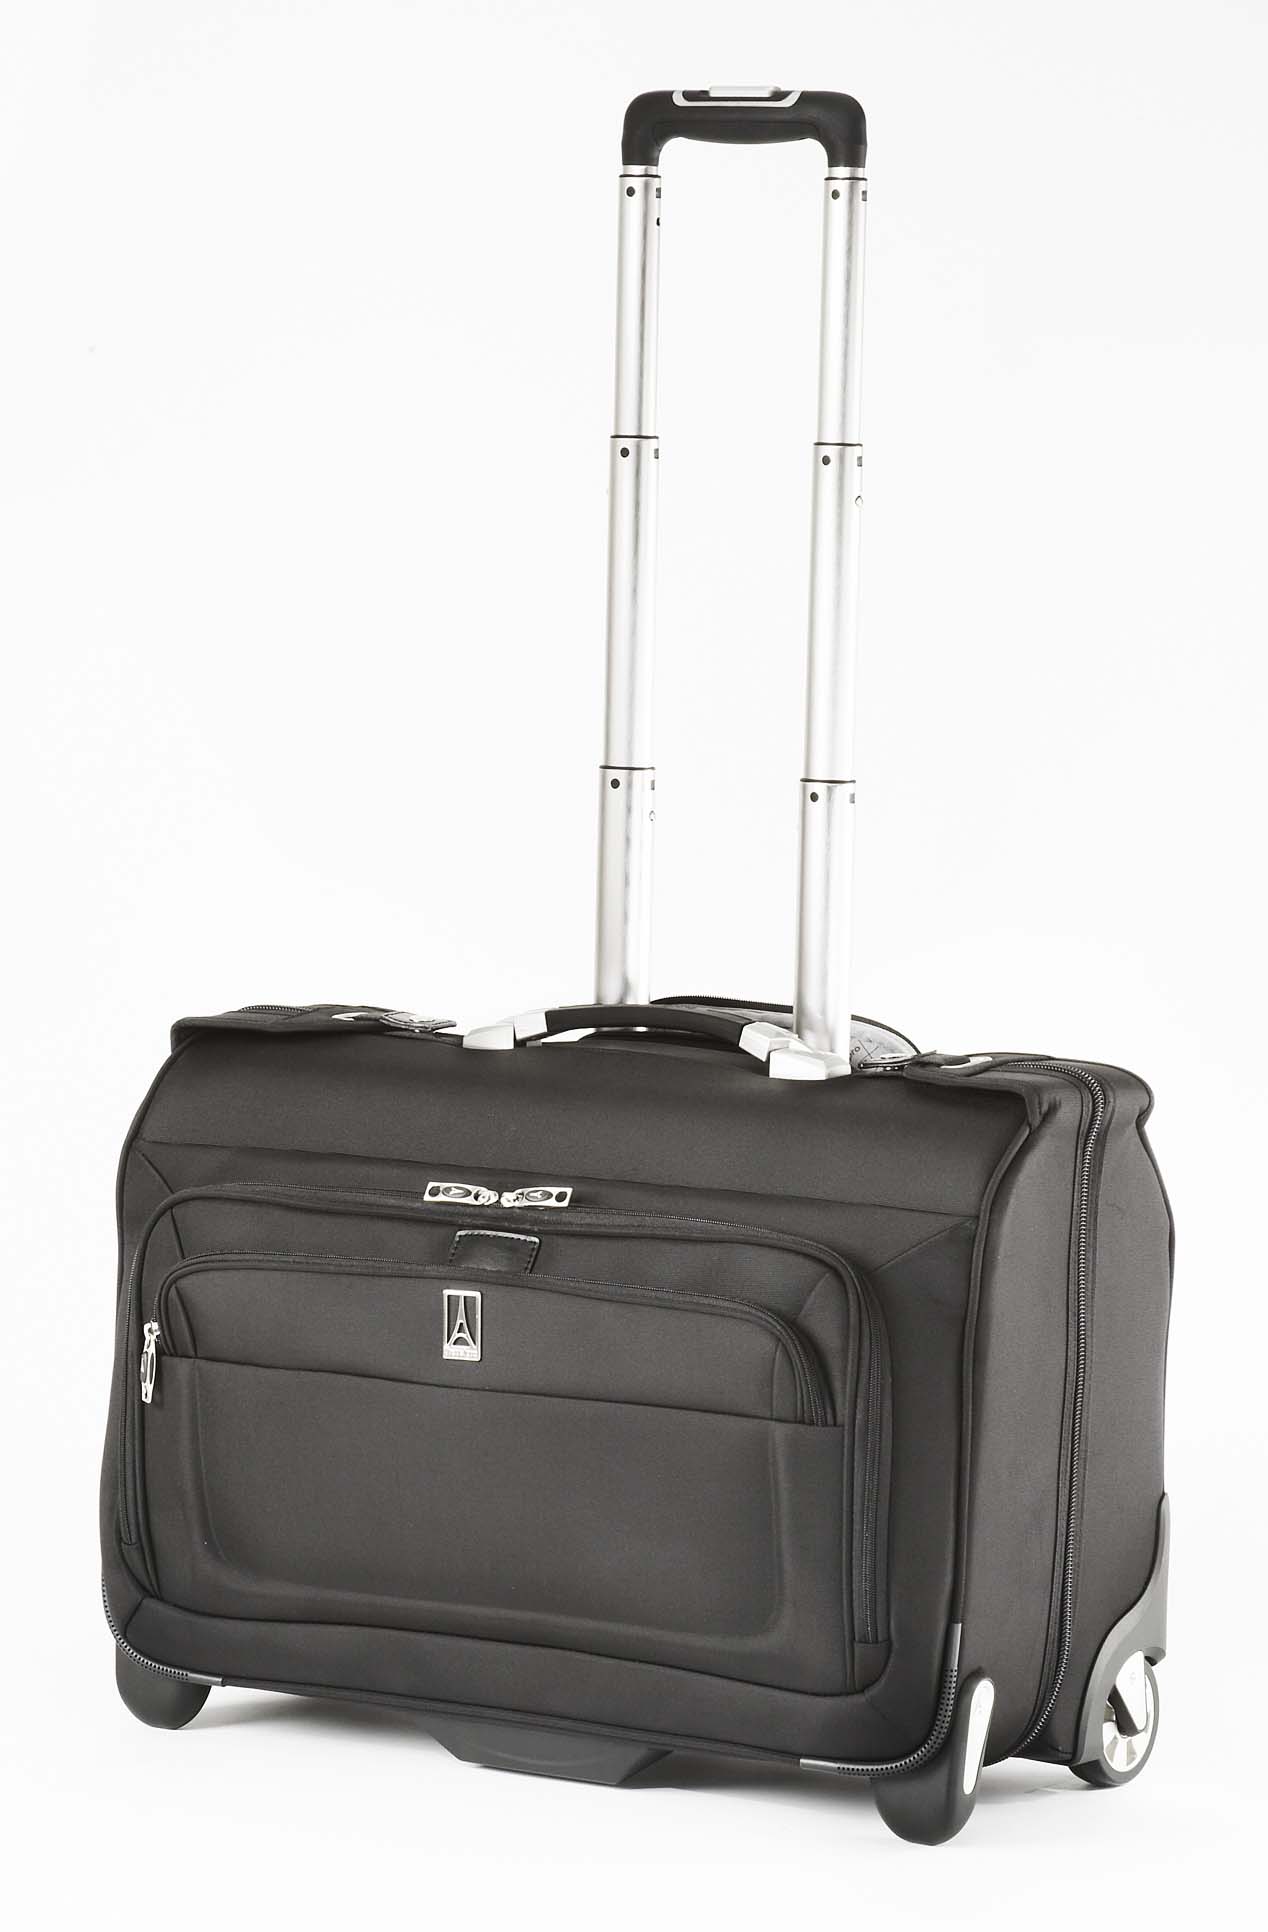 Travelpro Crew 8 Black Carry-on Wheeled Rolling Garment Bag suit carrier. NWT | eBay